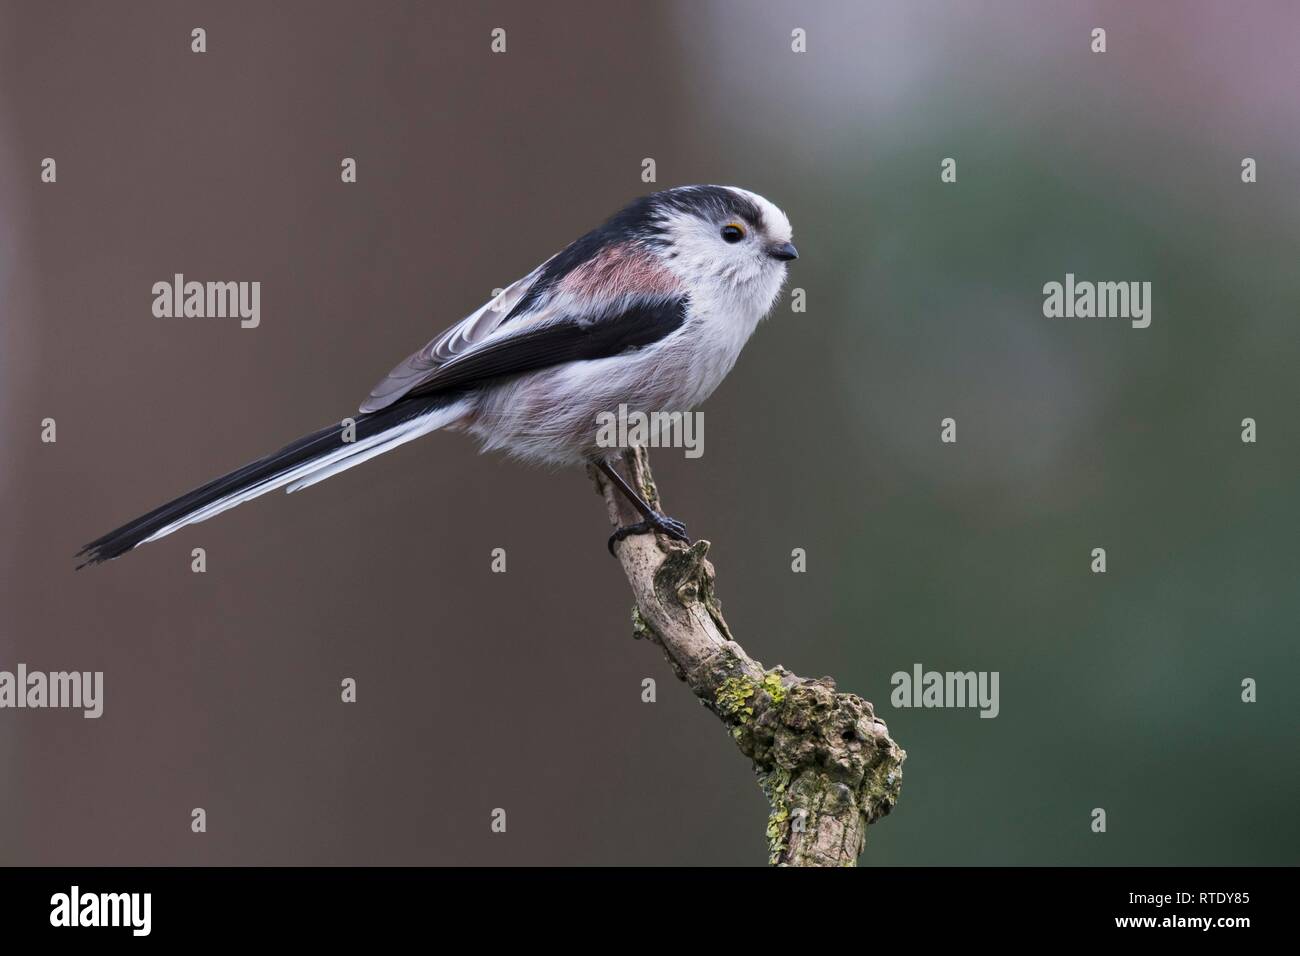 Long-tailed tit (Aegithalos caudatus), sitting on a branch, Emsland, Lower Saxony, Germany Stock Photo